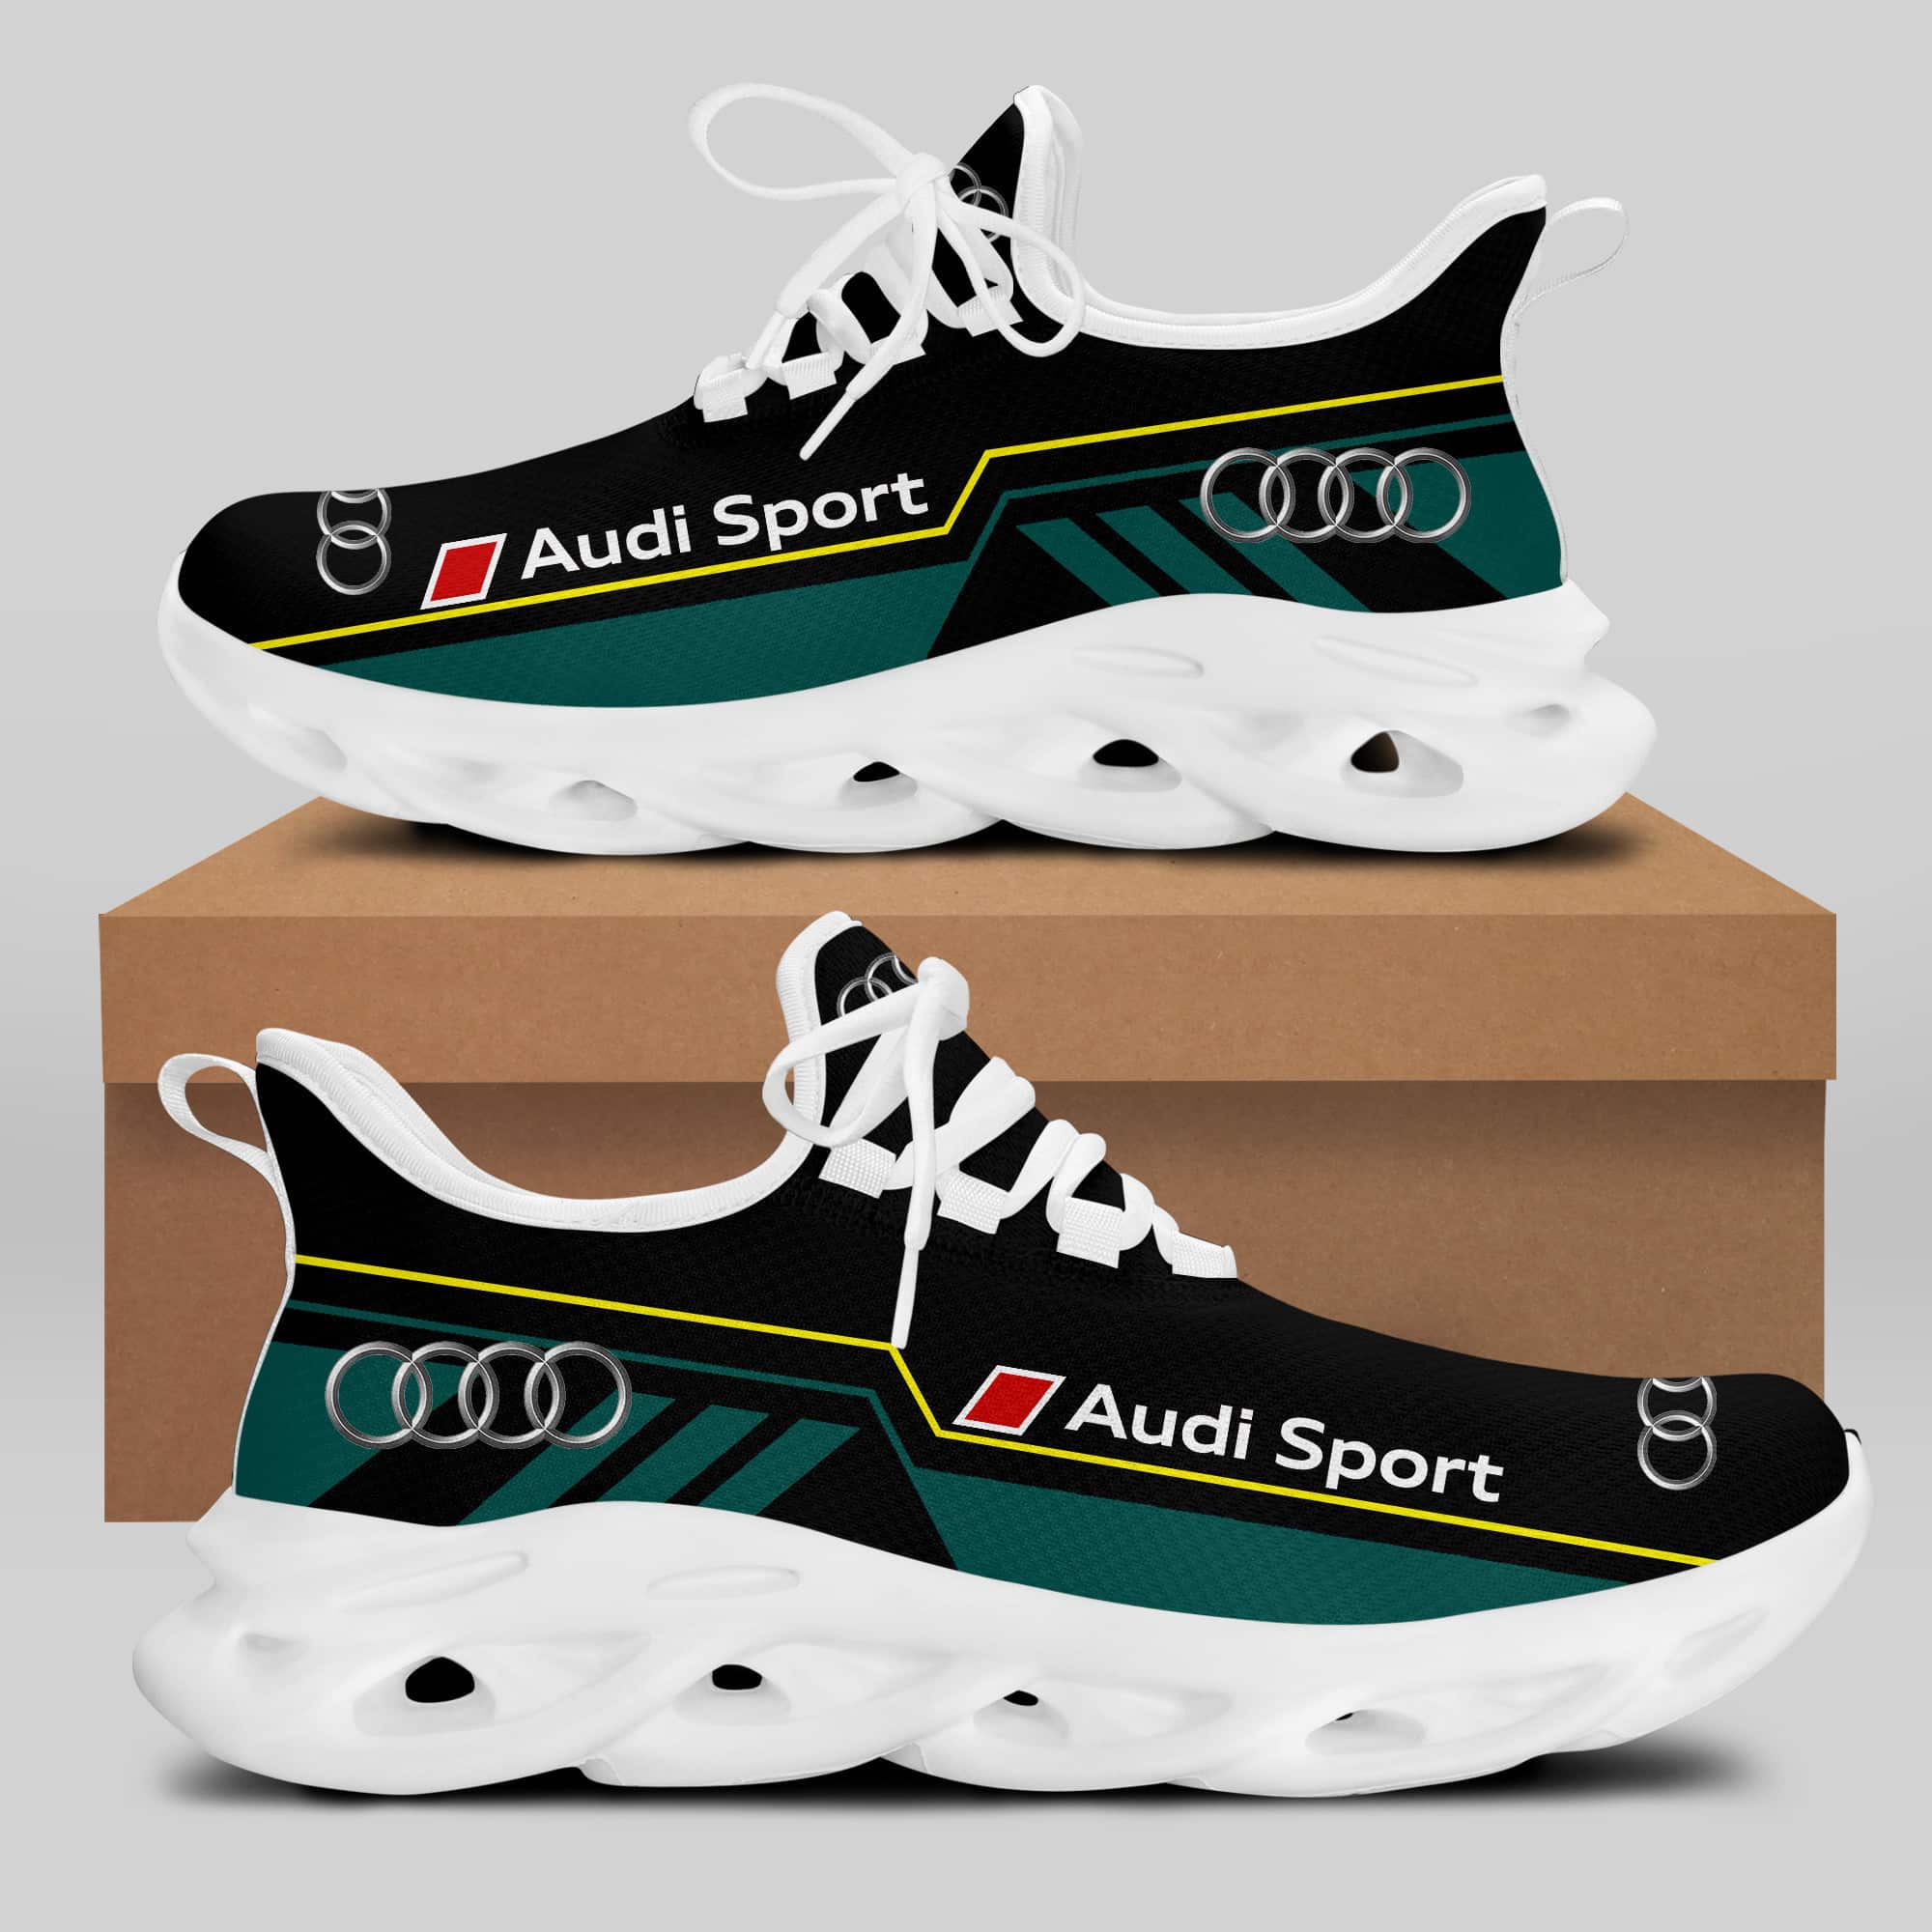 Audi Sport Running Shoes Max Soul Shoes Sneakers Ver 38 2